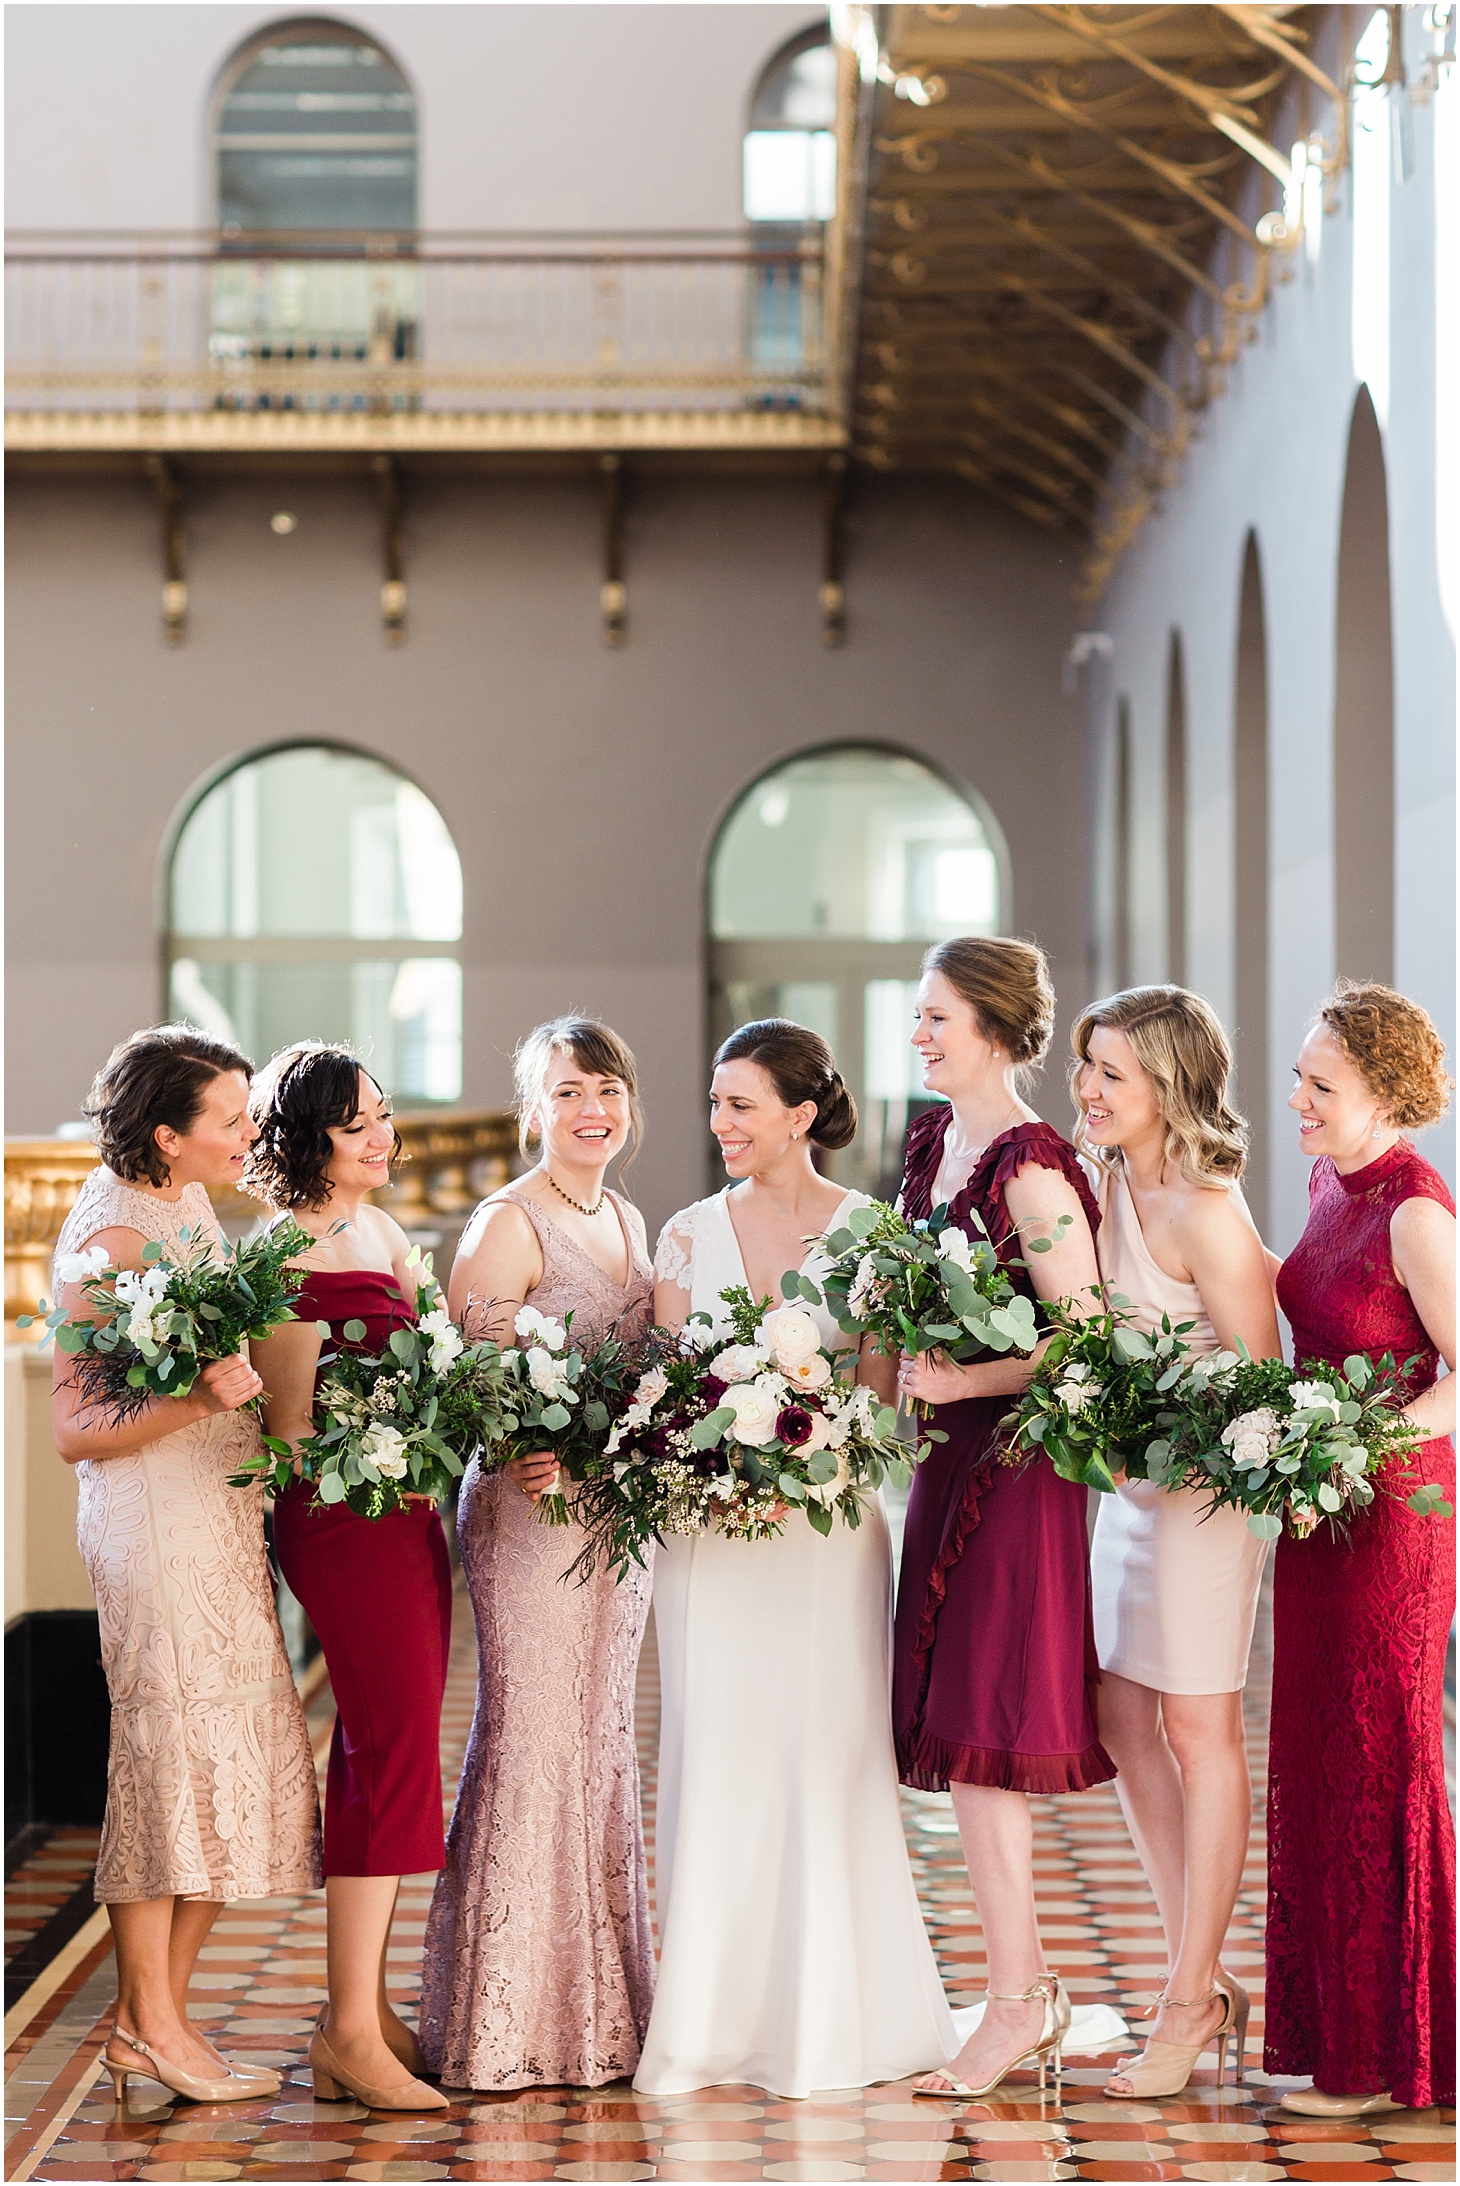 Wedding Party at Holy Rosary Church | Burgundy and Blush DC Wedding at District Winery | Sarah Bradshaw Photography